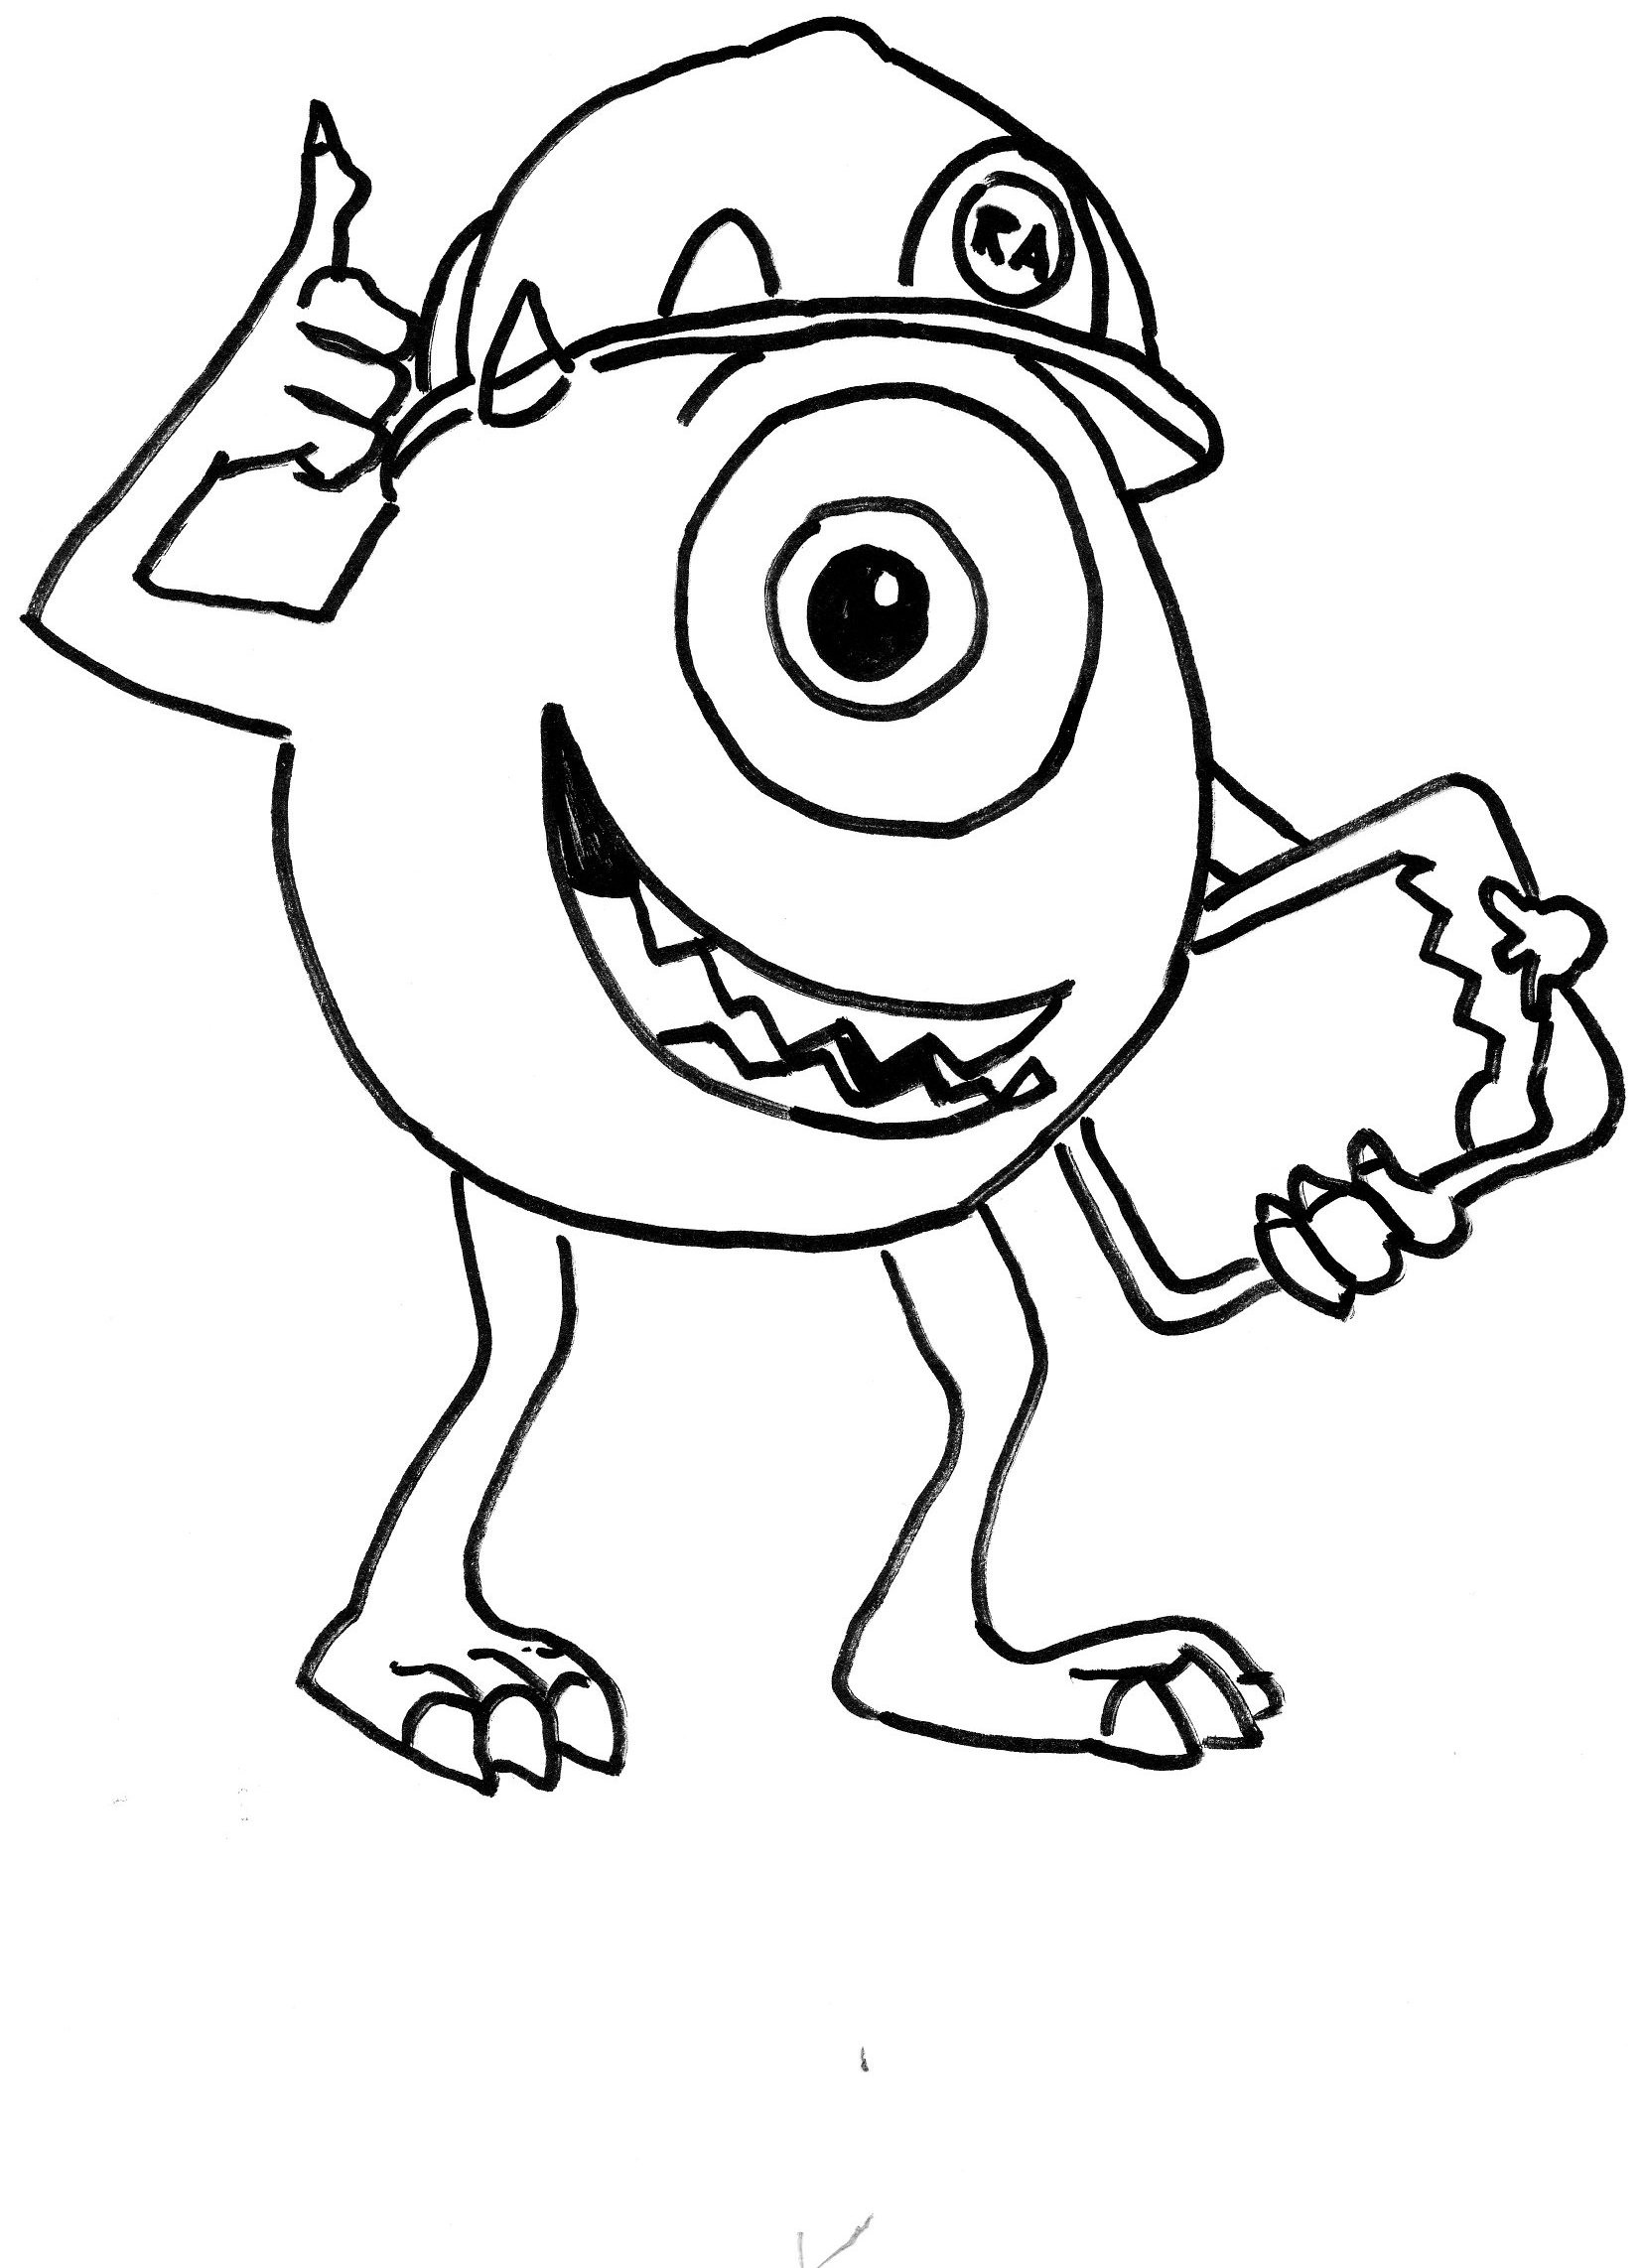 For Boys Coloring Sheets
 Coloring Pages for Boys 2018 Dr Odd